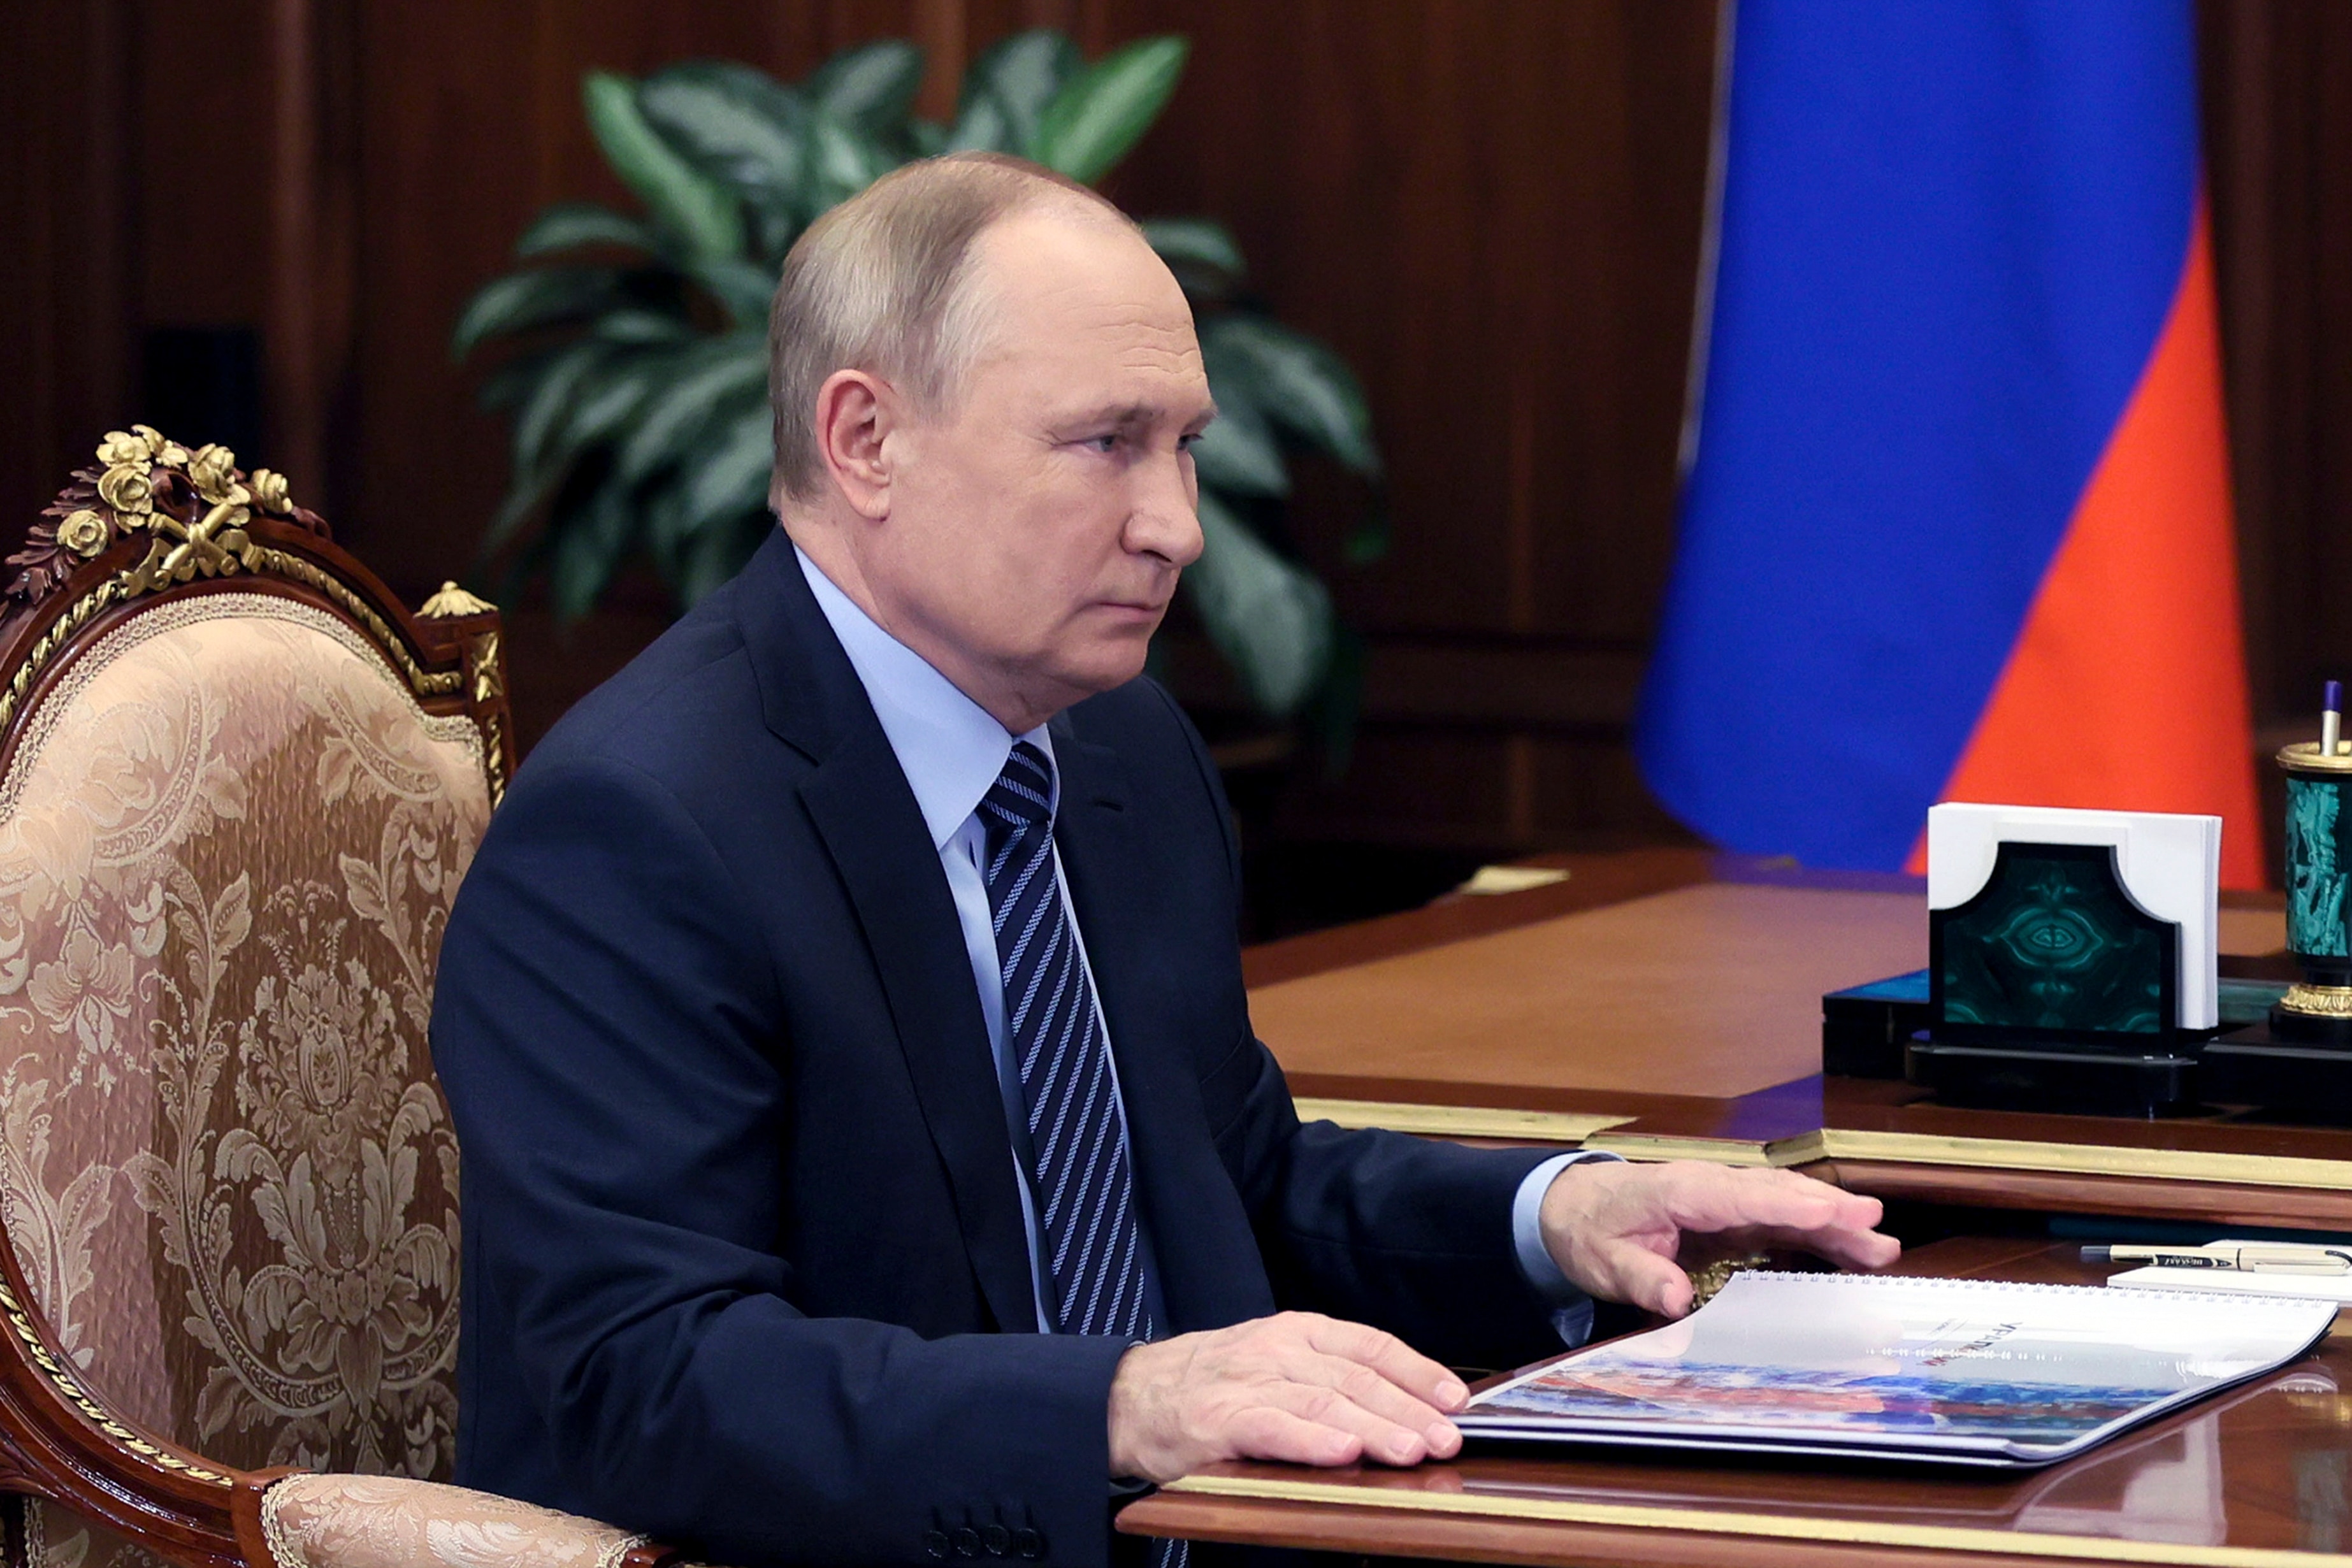 Russian President Vladimir Putin listens during a meeting in the Kremlin in Moscow, Russia, Thursday, January 13, 2022.